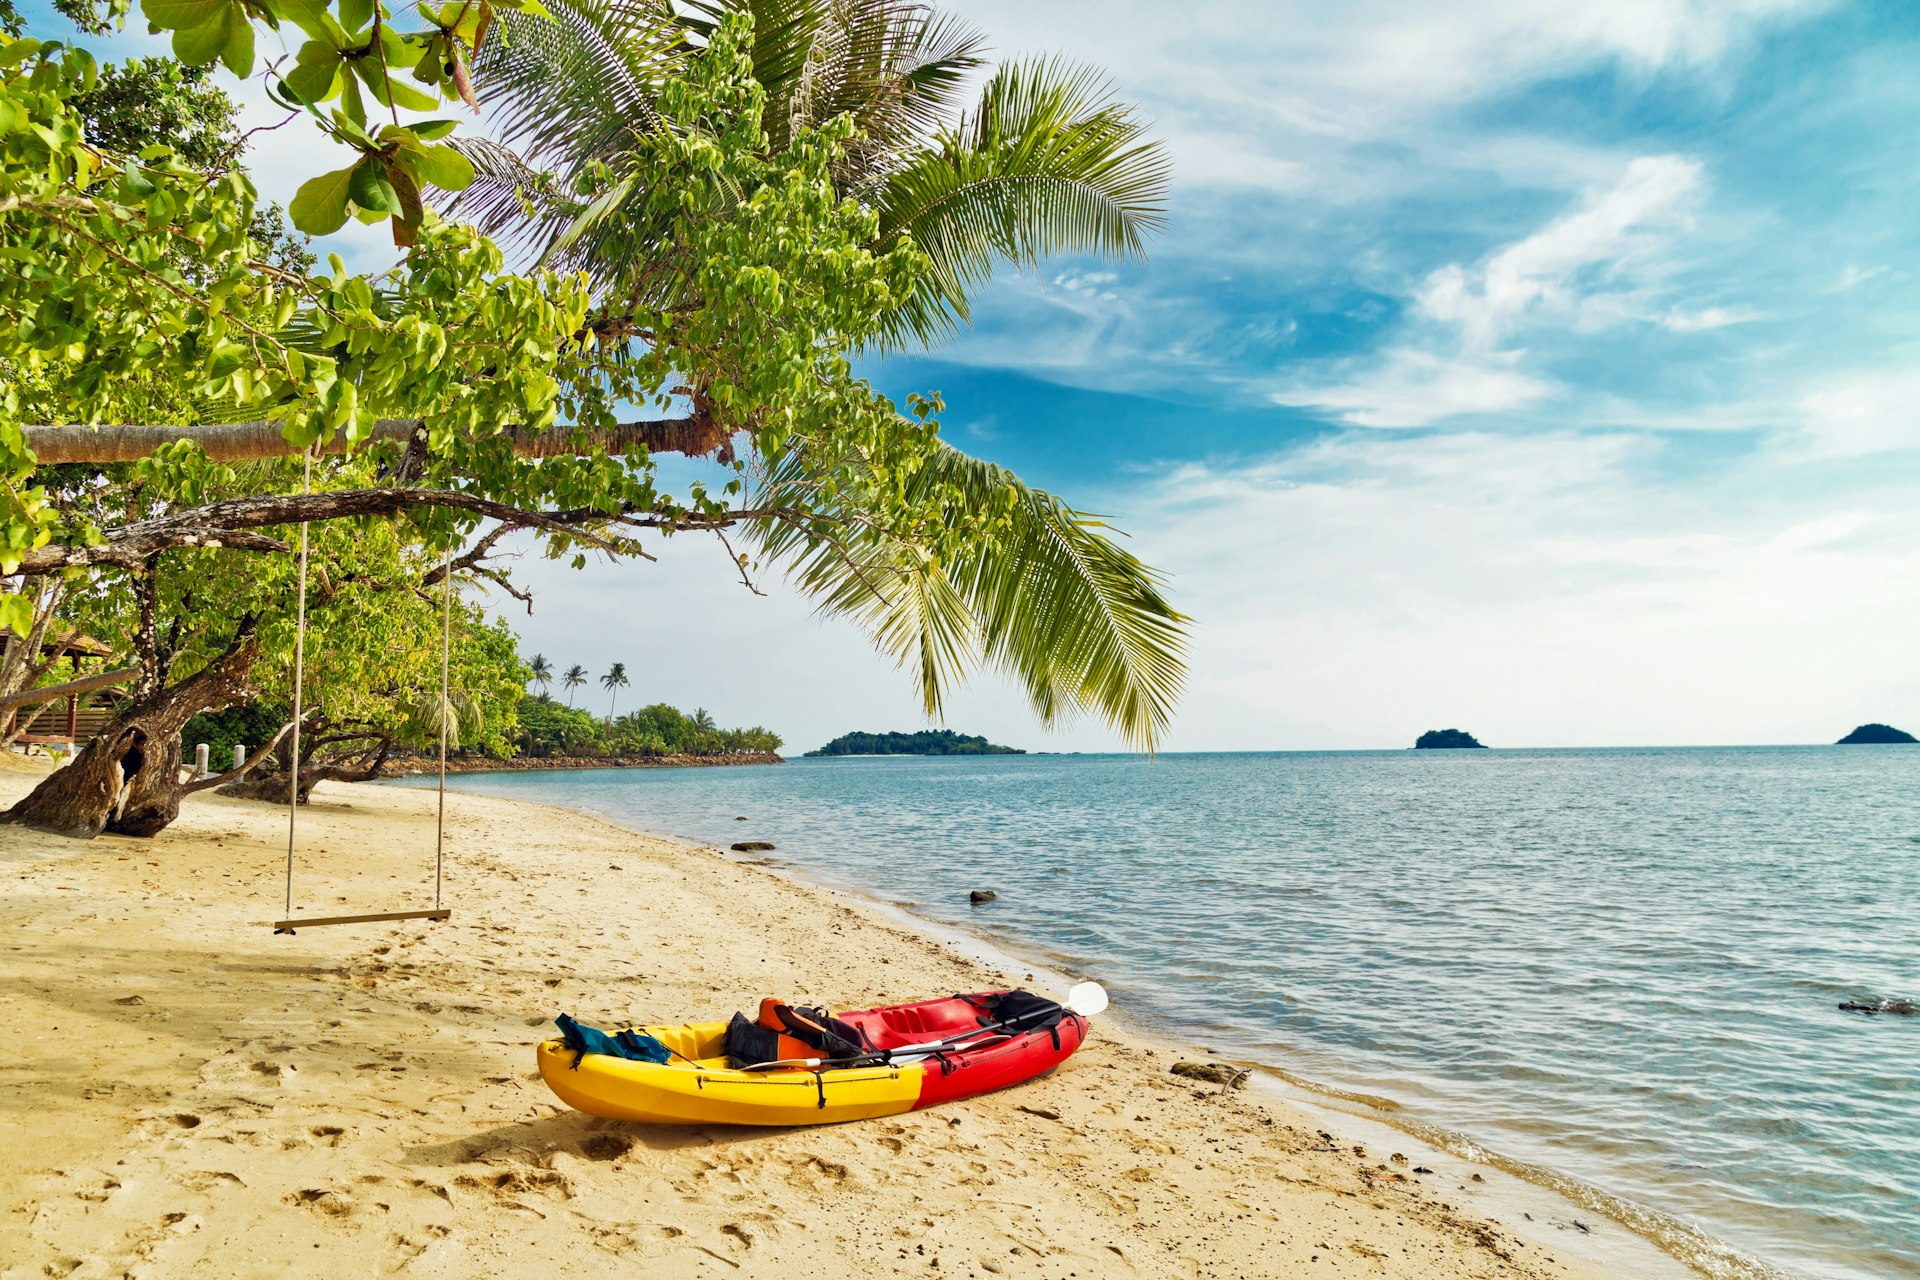 Kayak at the tropical beach at Phu Quoc island  in Vietnam